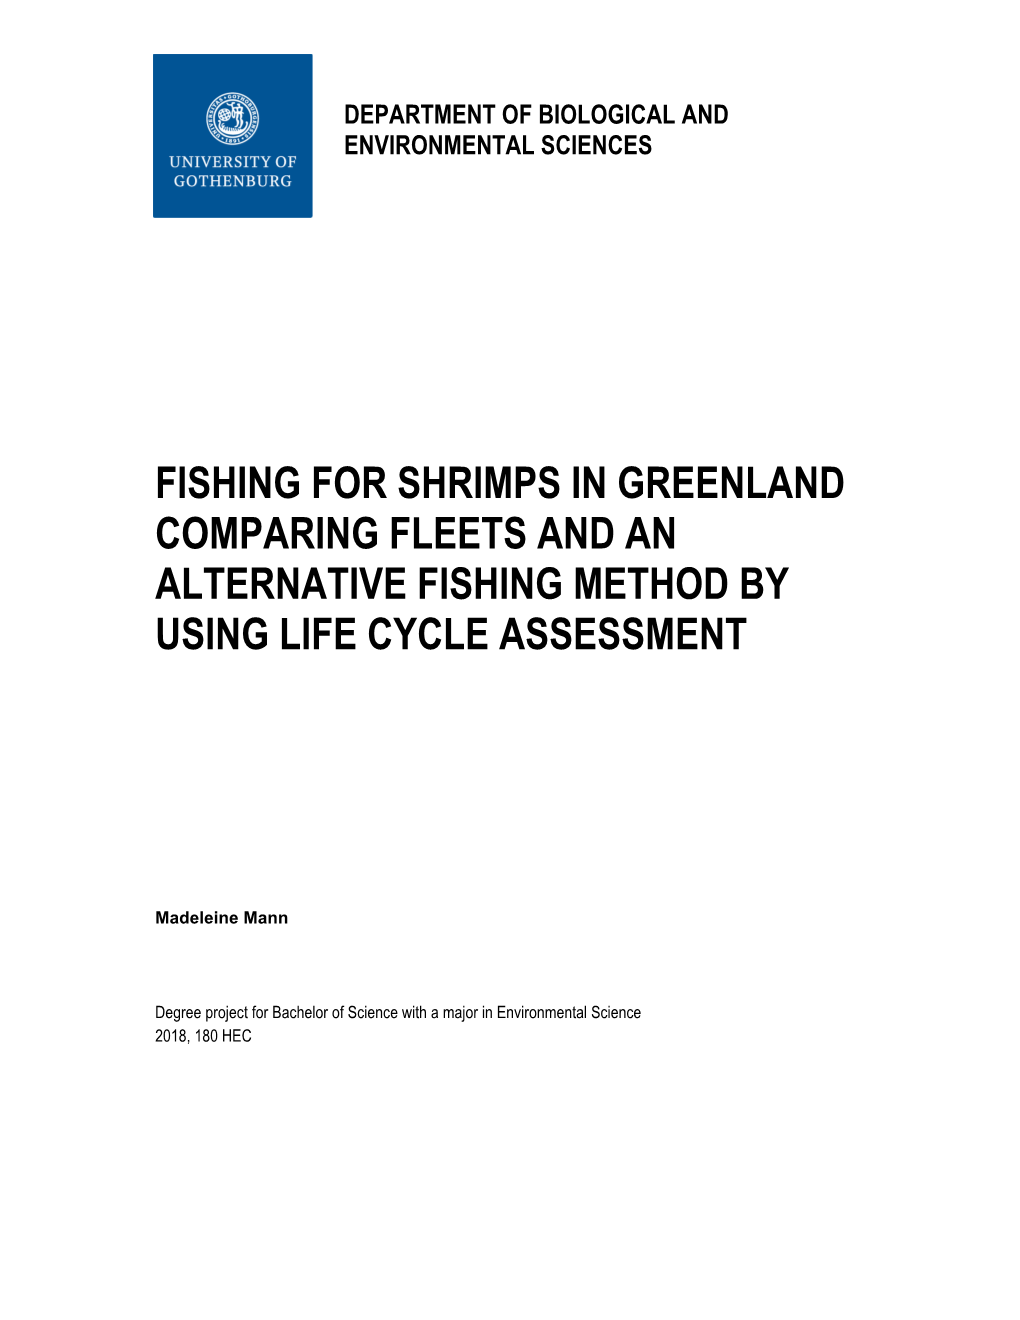 Fishing for Shrimps in Greenland Comparing Fleets and an Alternative Fishing Method by Using Life Cycle Assessment